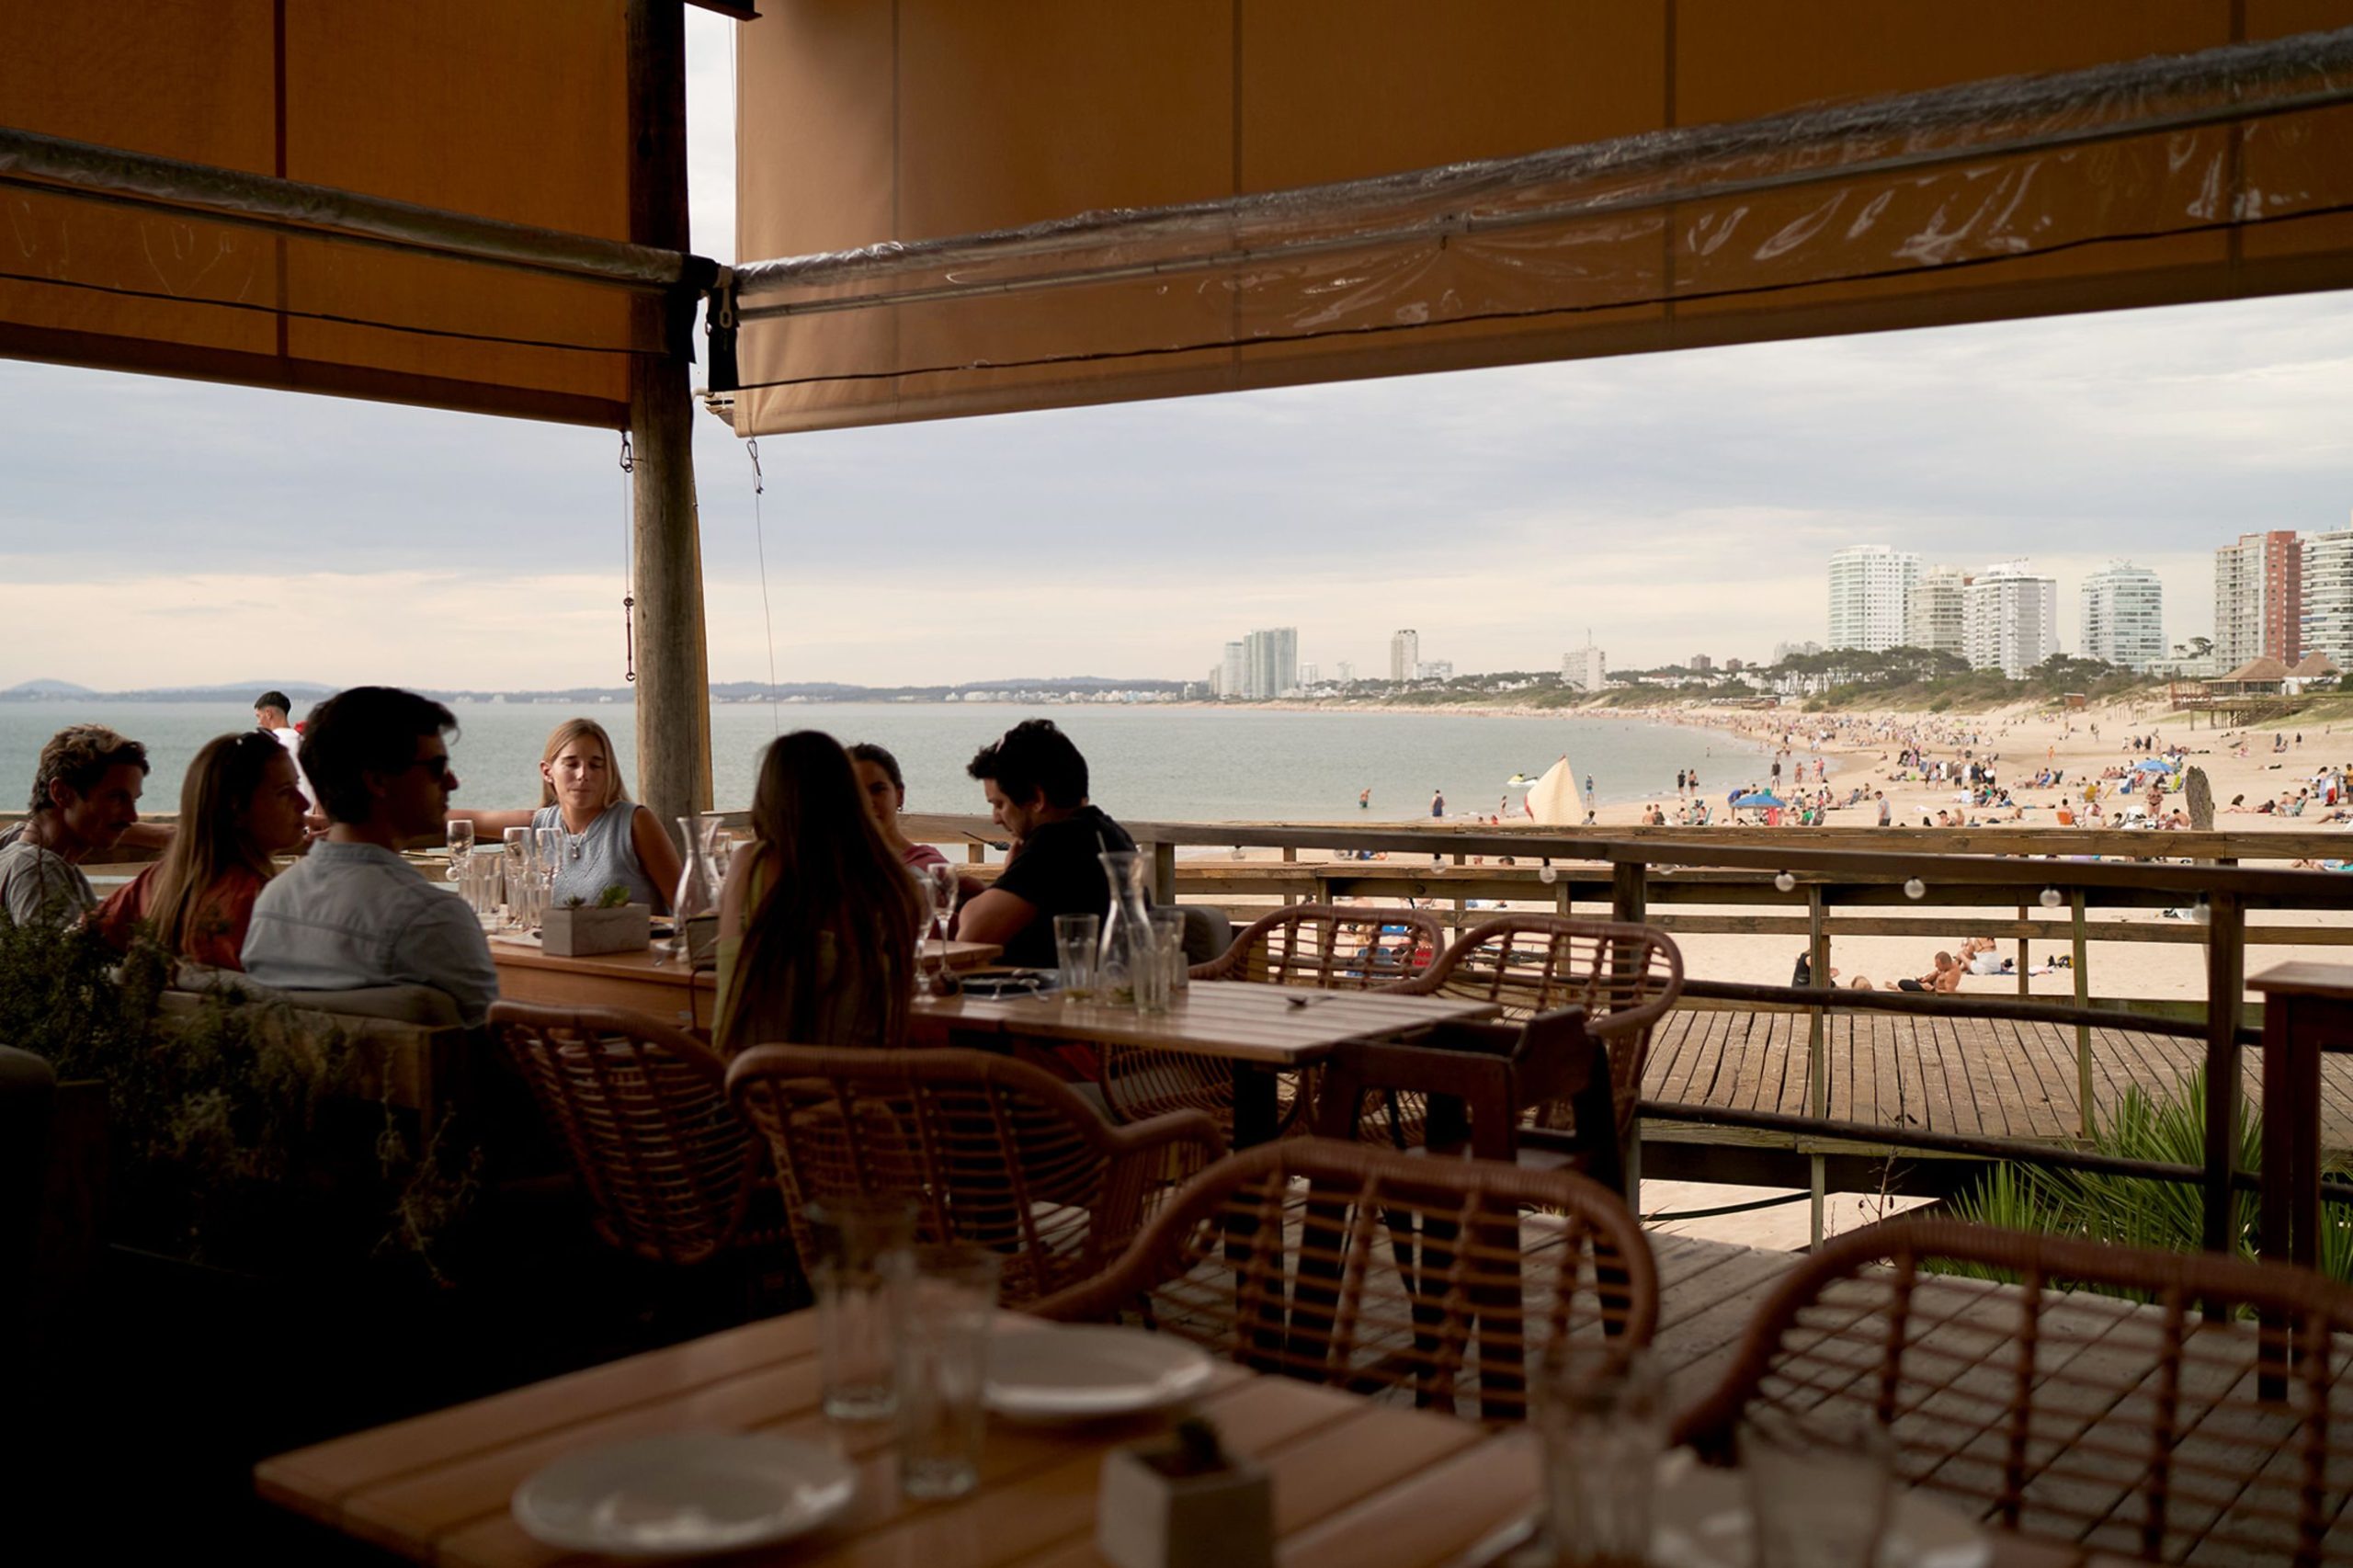 About 15,000 new residents have settled in and around Punta del Este since the pandemic